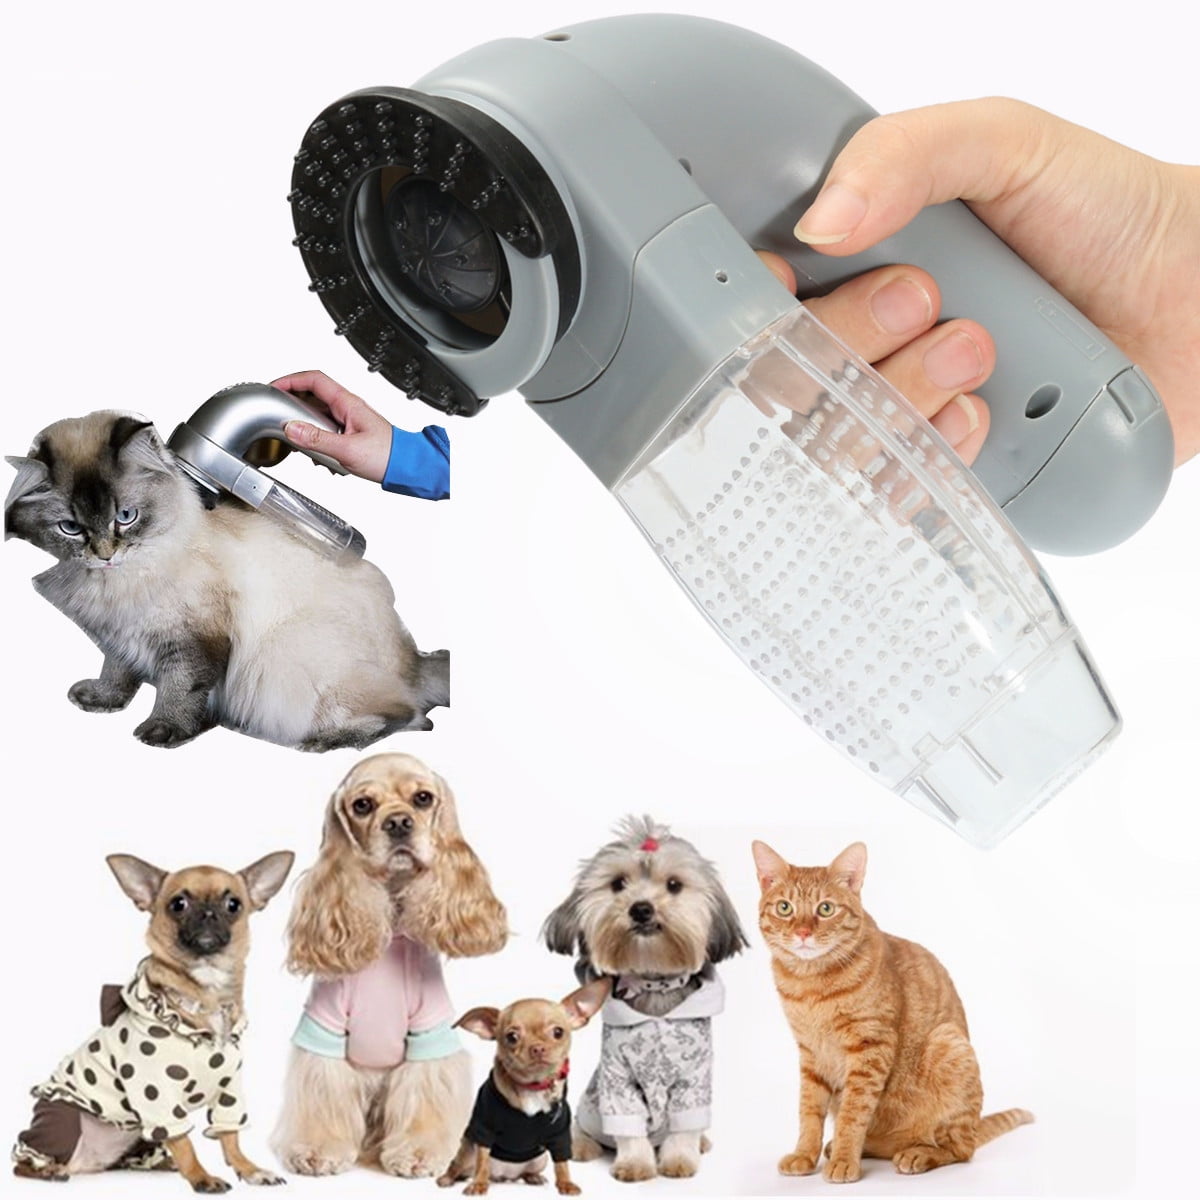 New Electric Pet Hair Remover Dog Cat Grooming Brush Comb Vacuum Clean Trimmer